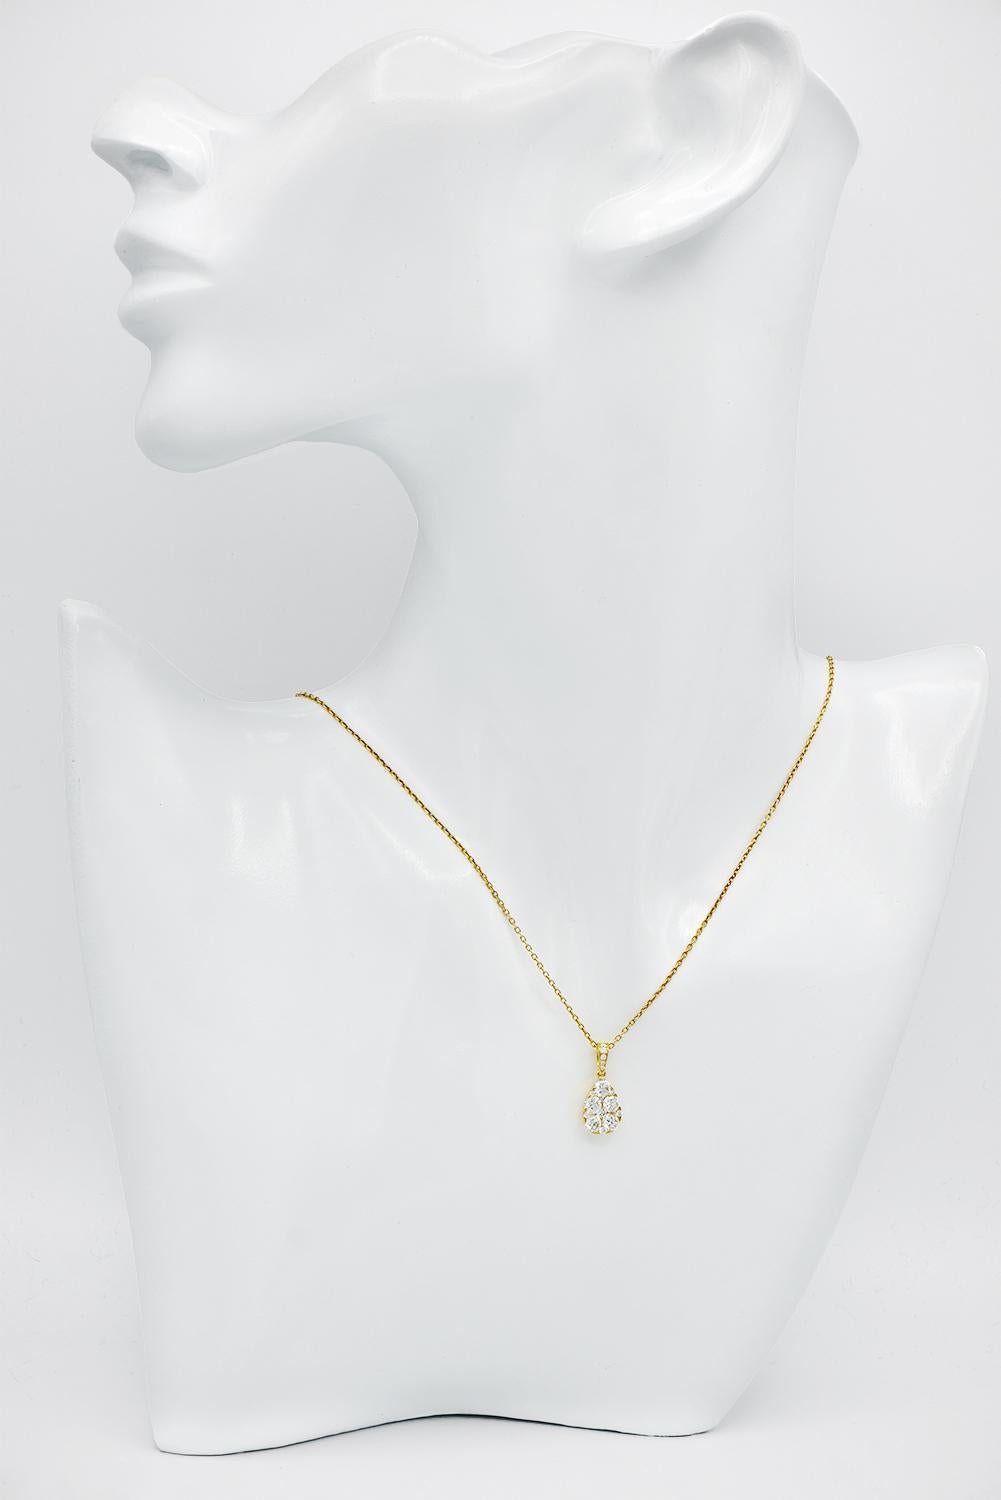 Round Cut Yellow Gold Cluster Drop Pendant Necklace For Sale